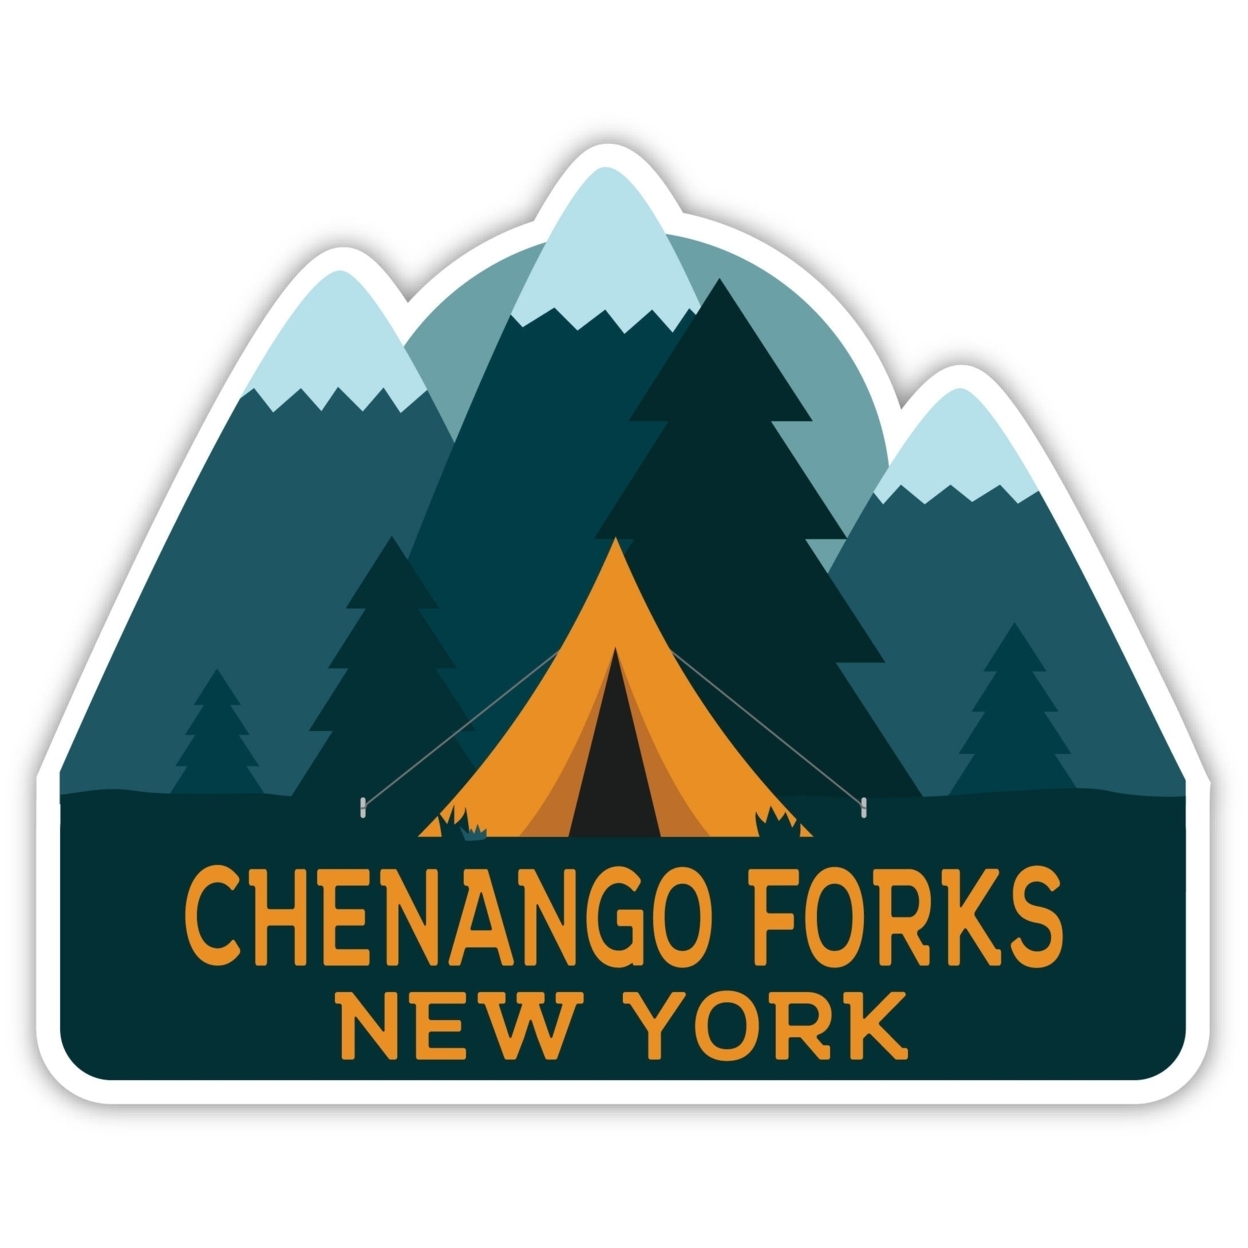 Chenango Forks New York Souvenir Decorative Stickers (Choose Theme And Size) - 4-Pack, 6-Inch, Tent